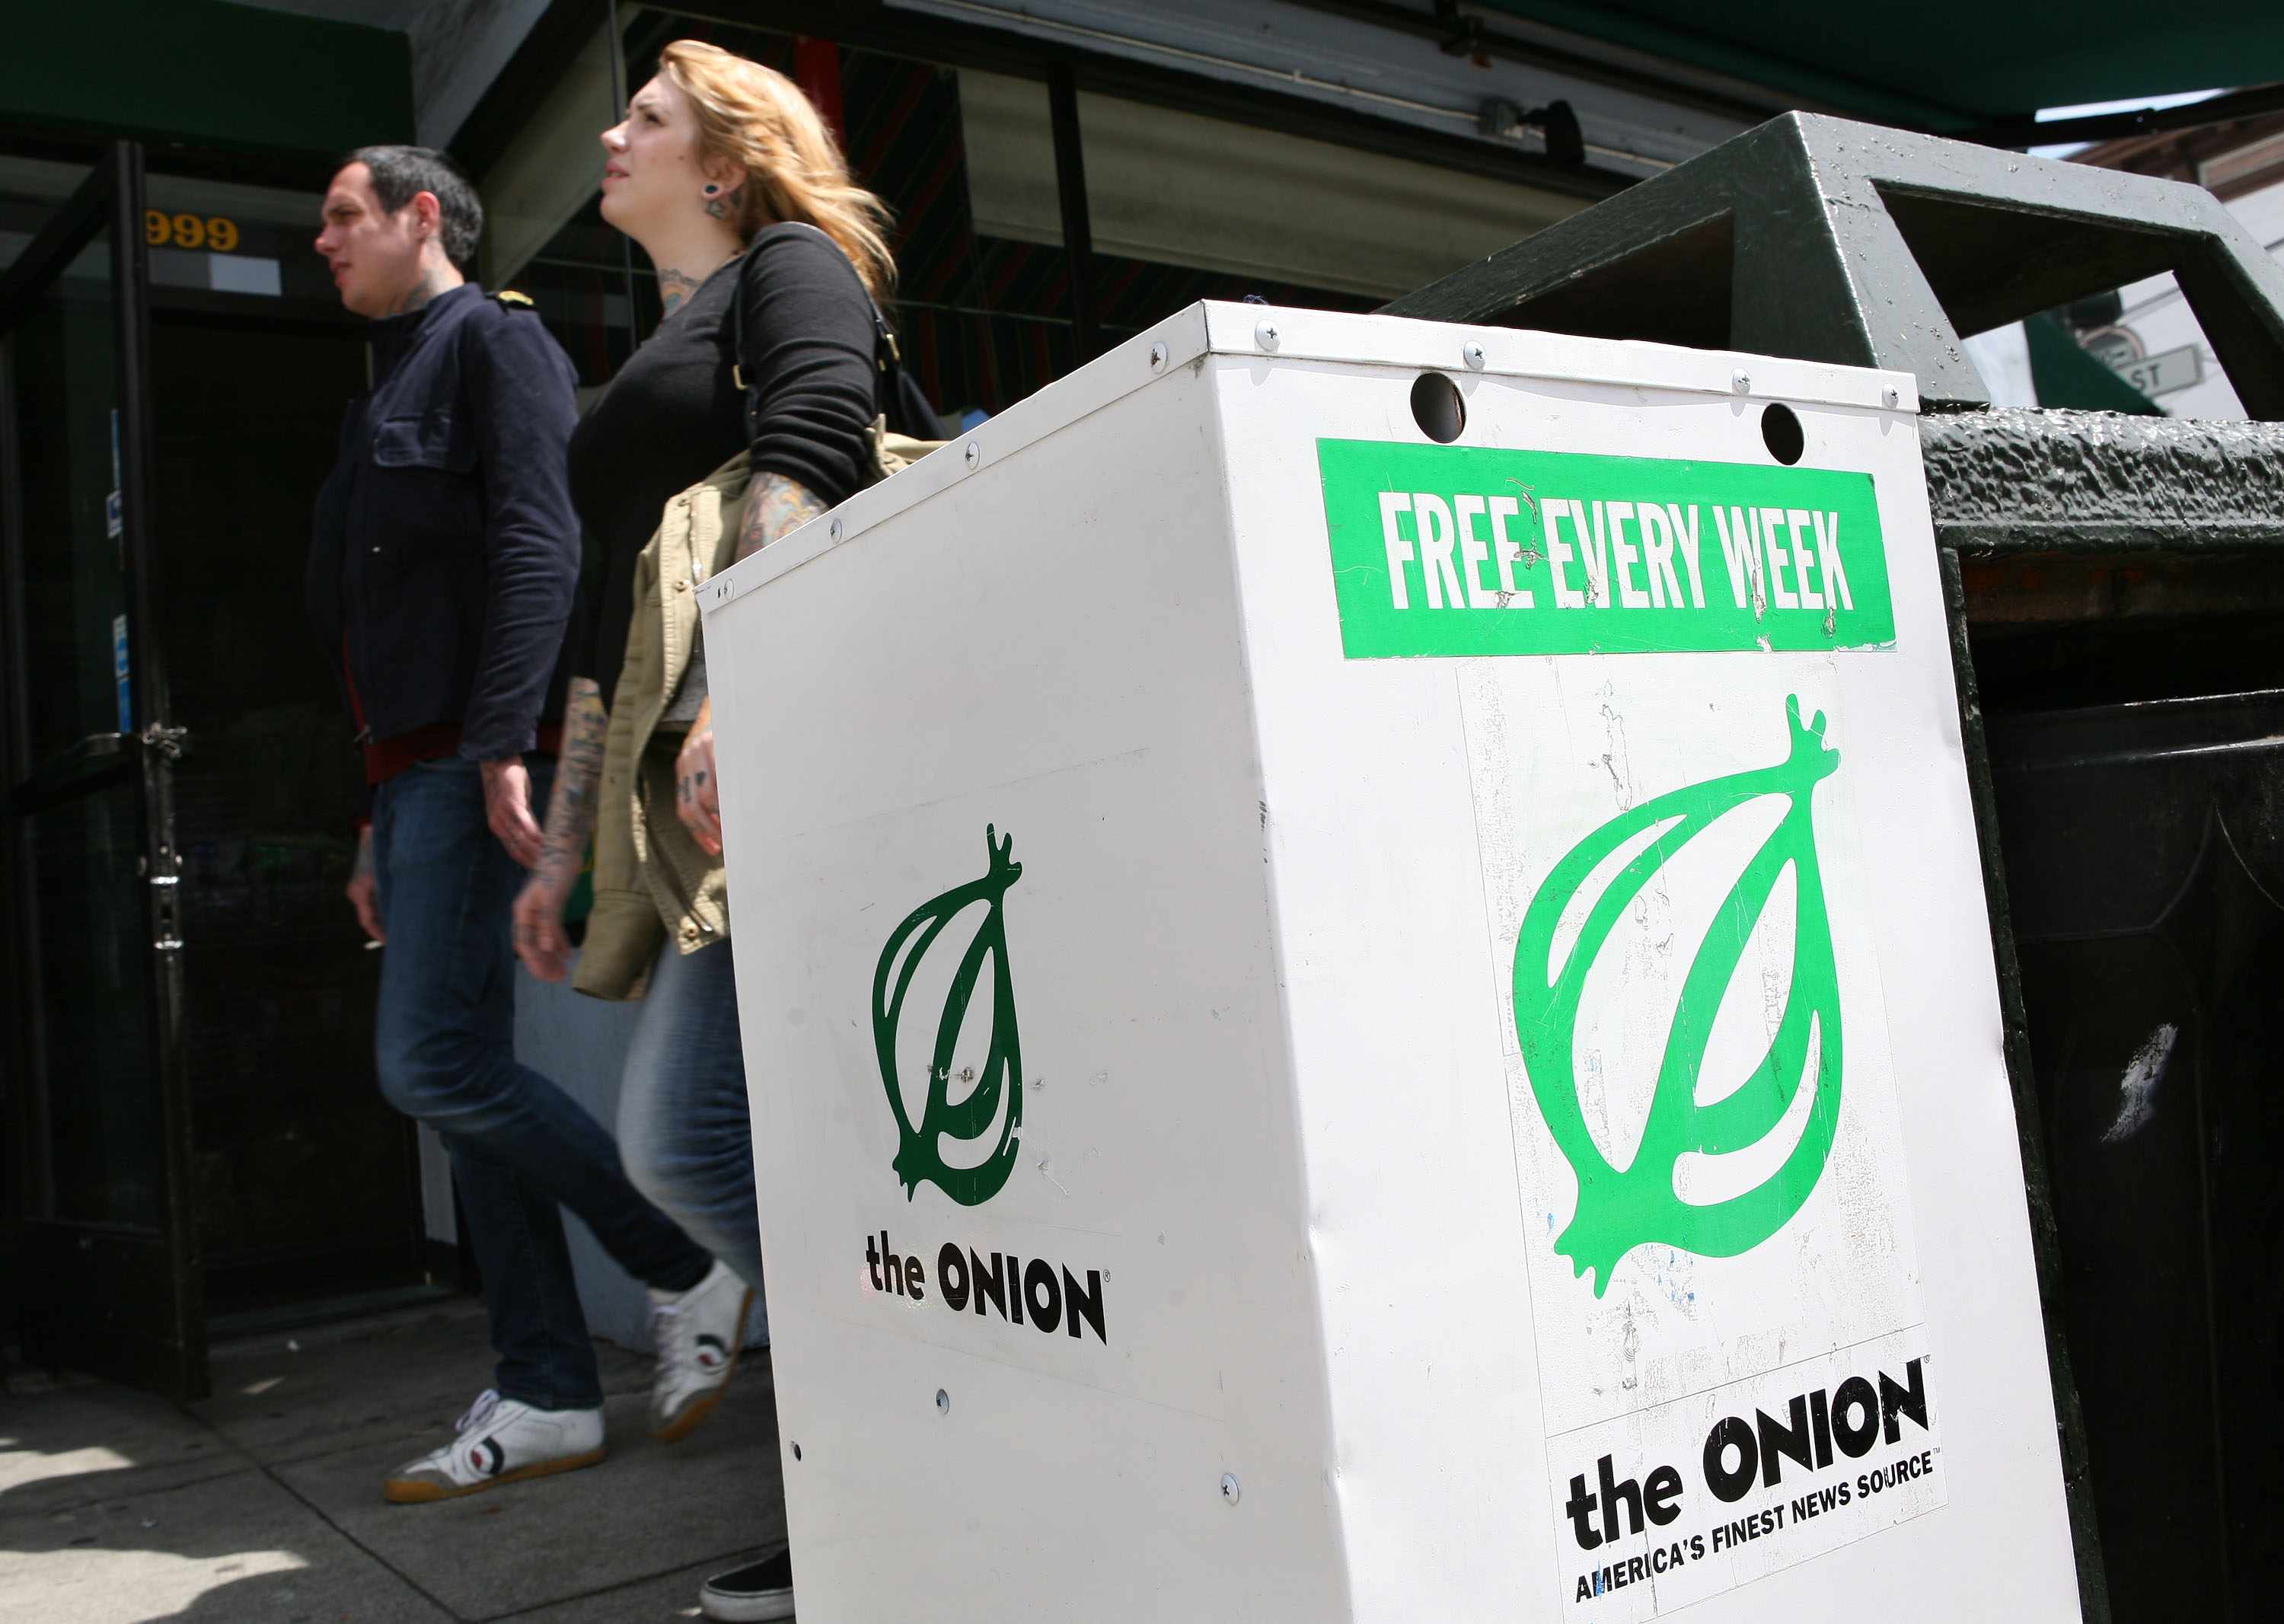 The Onion newspaper stand